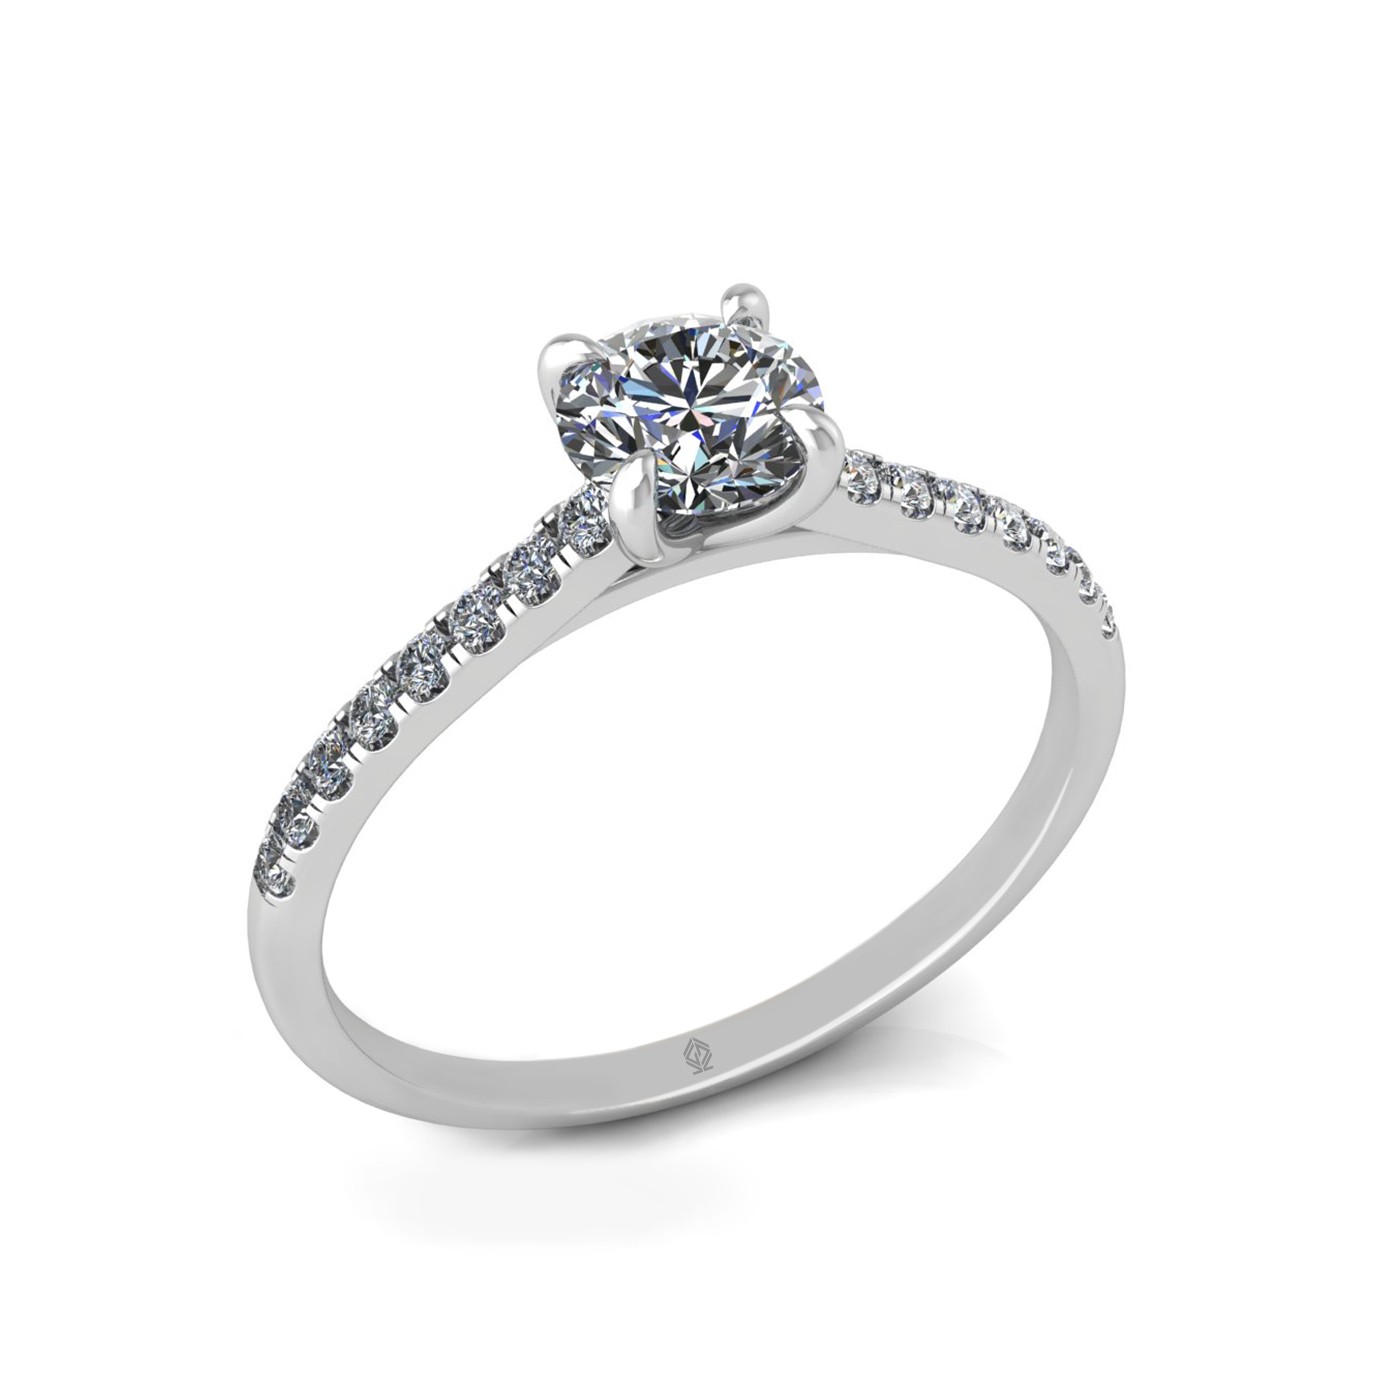 18k white gold 0,50 ct 4 prongs round cut diamond engagement ring with whisper thin pavÉ set band